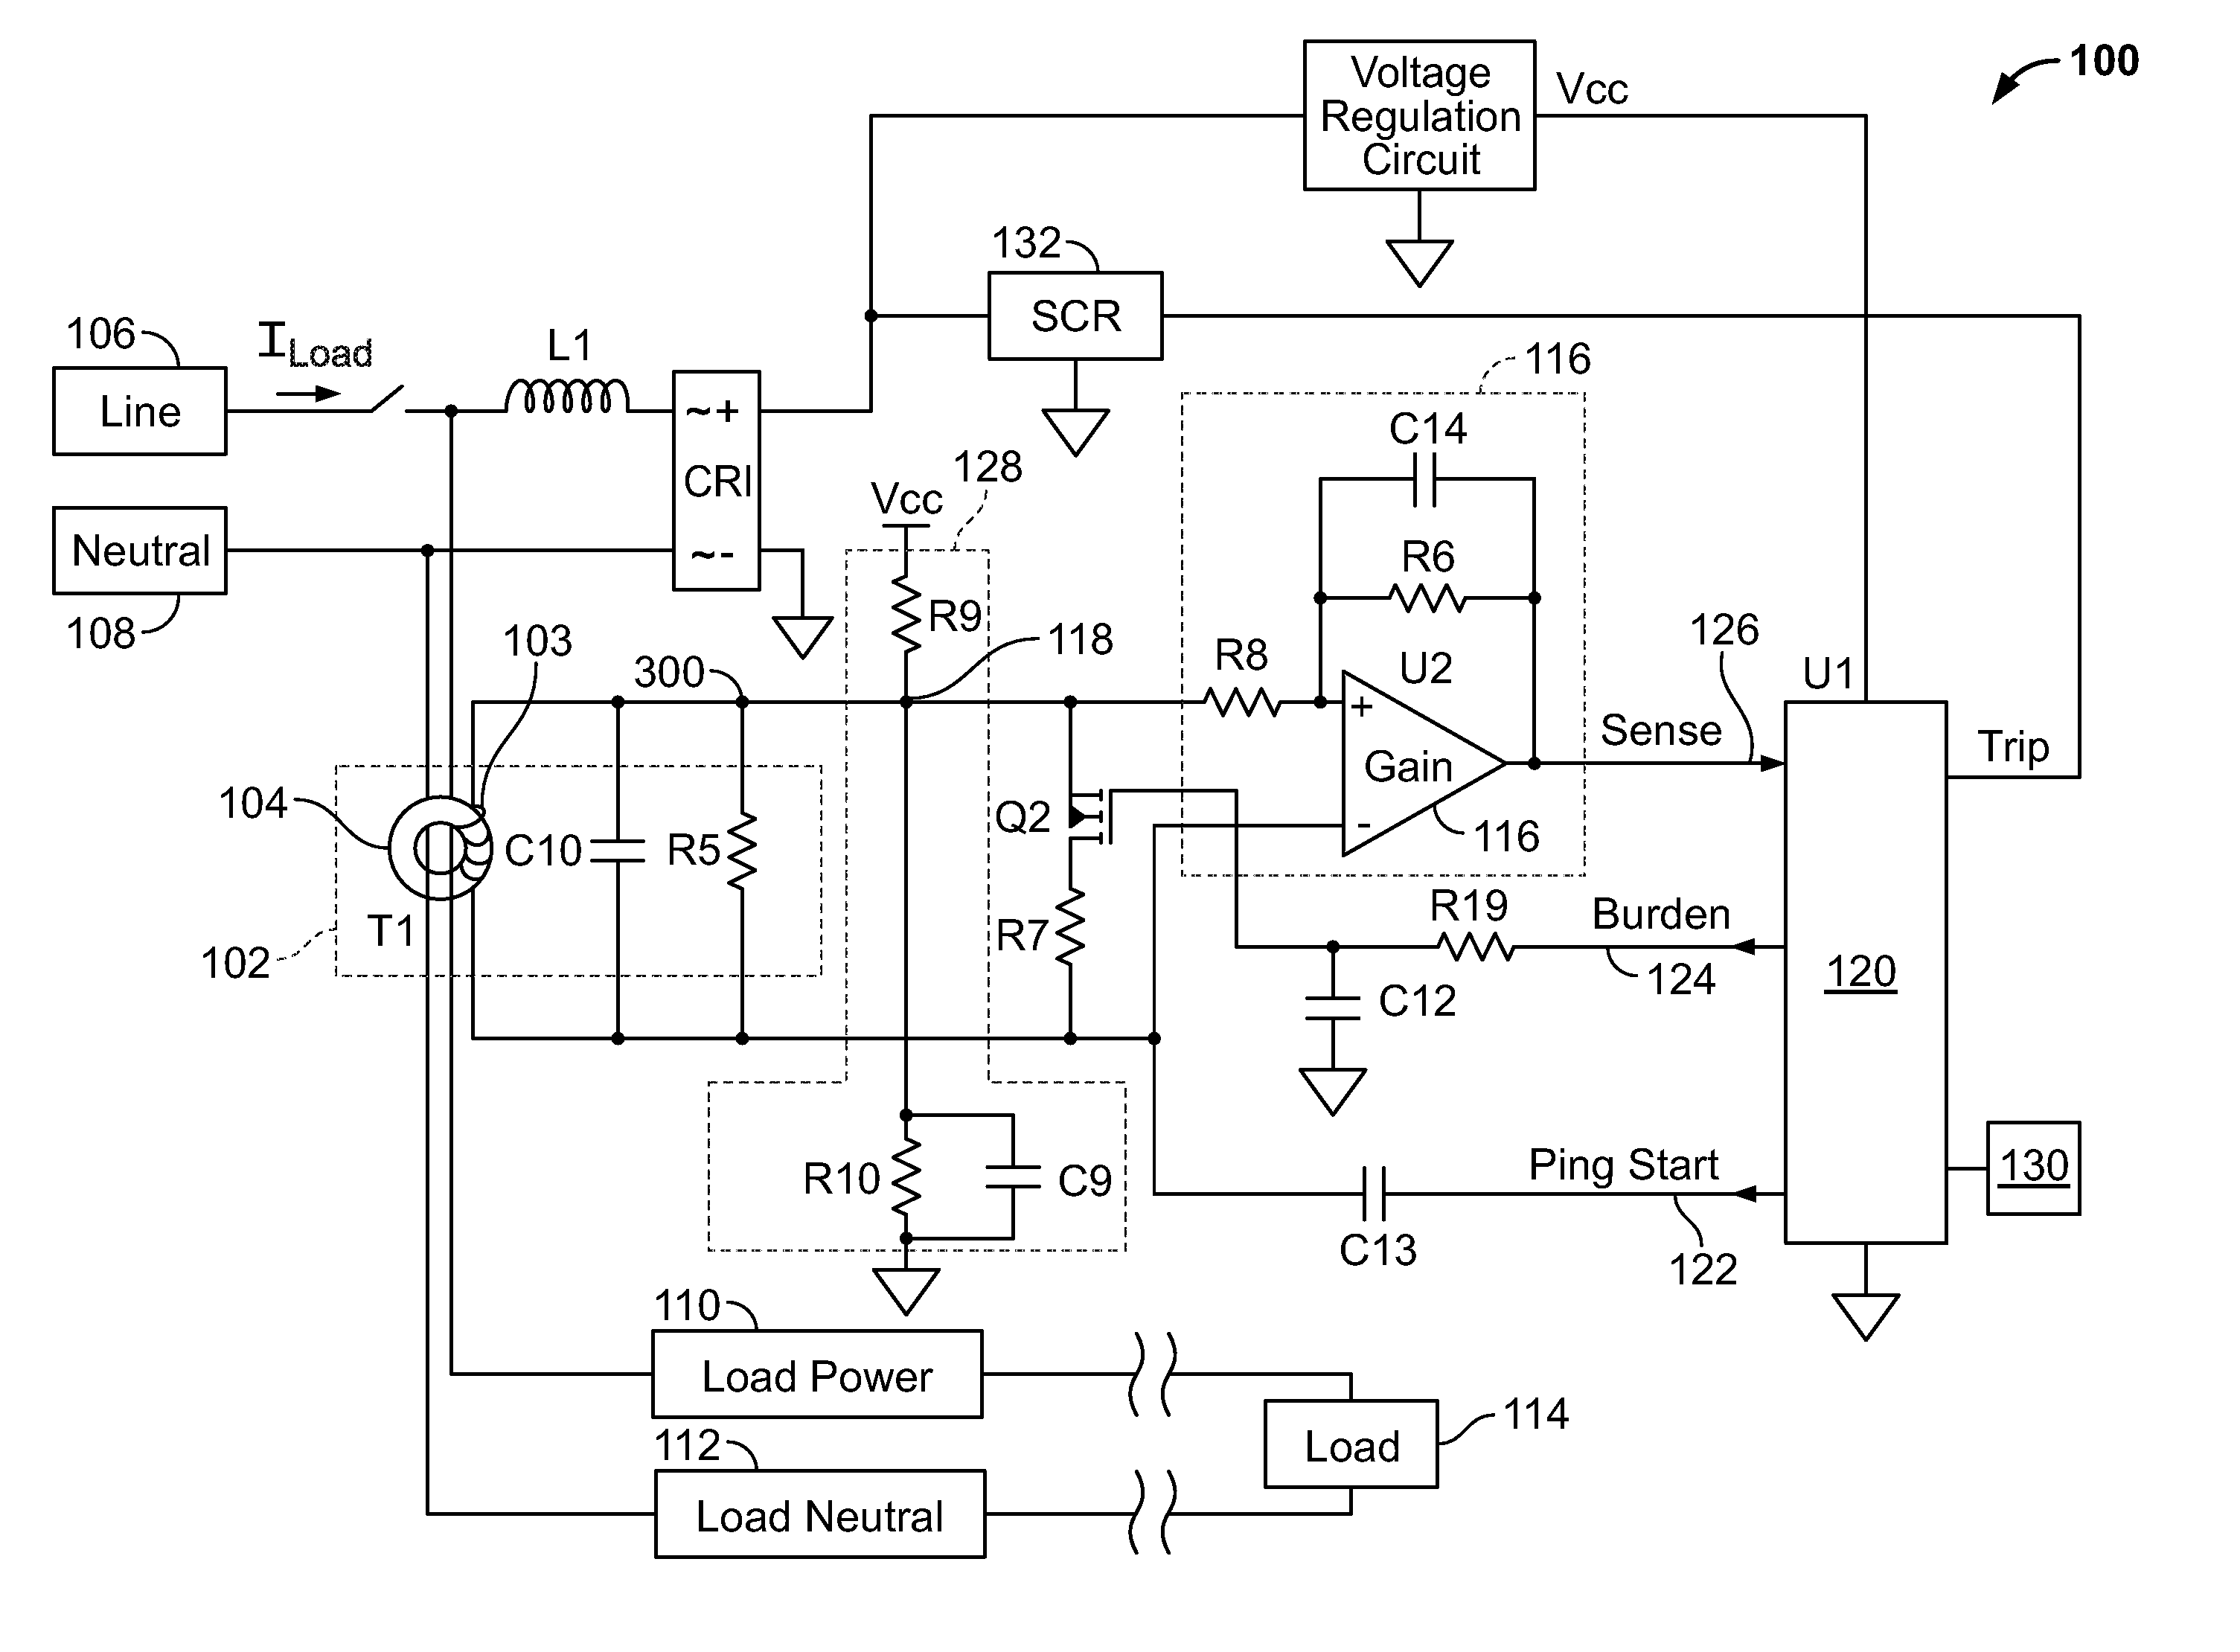 Apparatus and Method for Measuring Load Current Using a Ground Fault Sensing Transformer